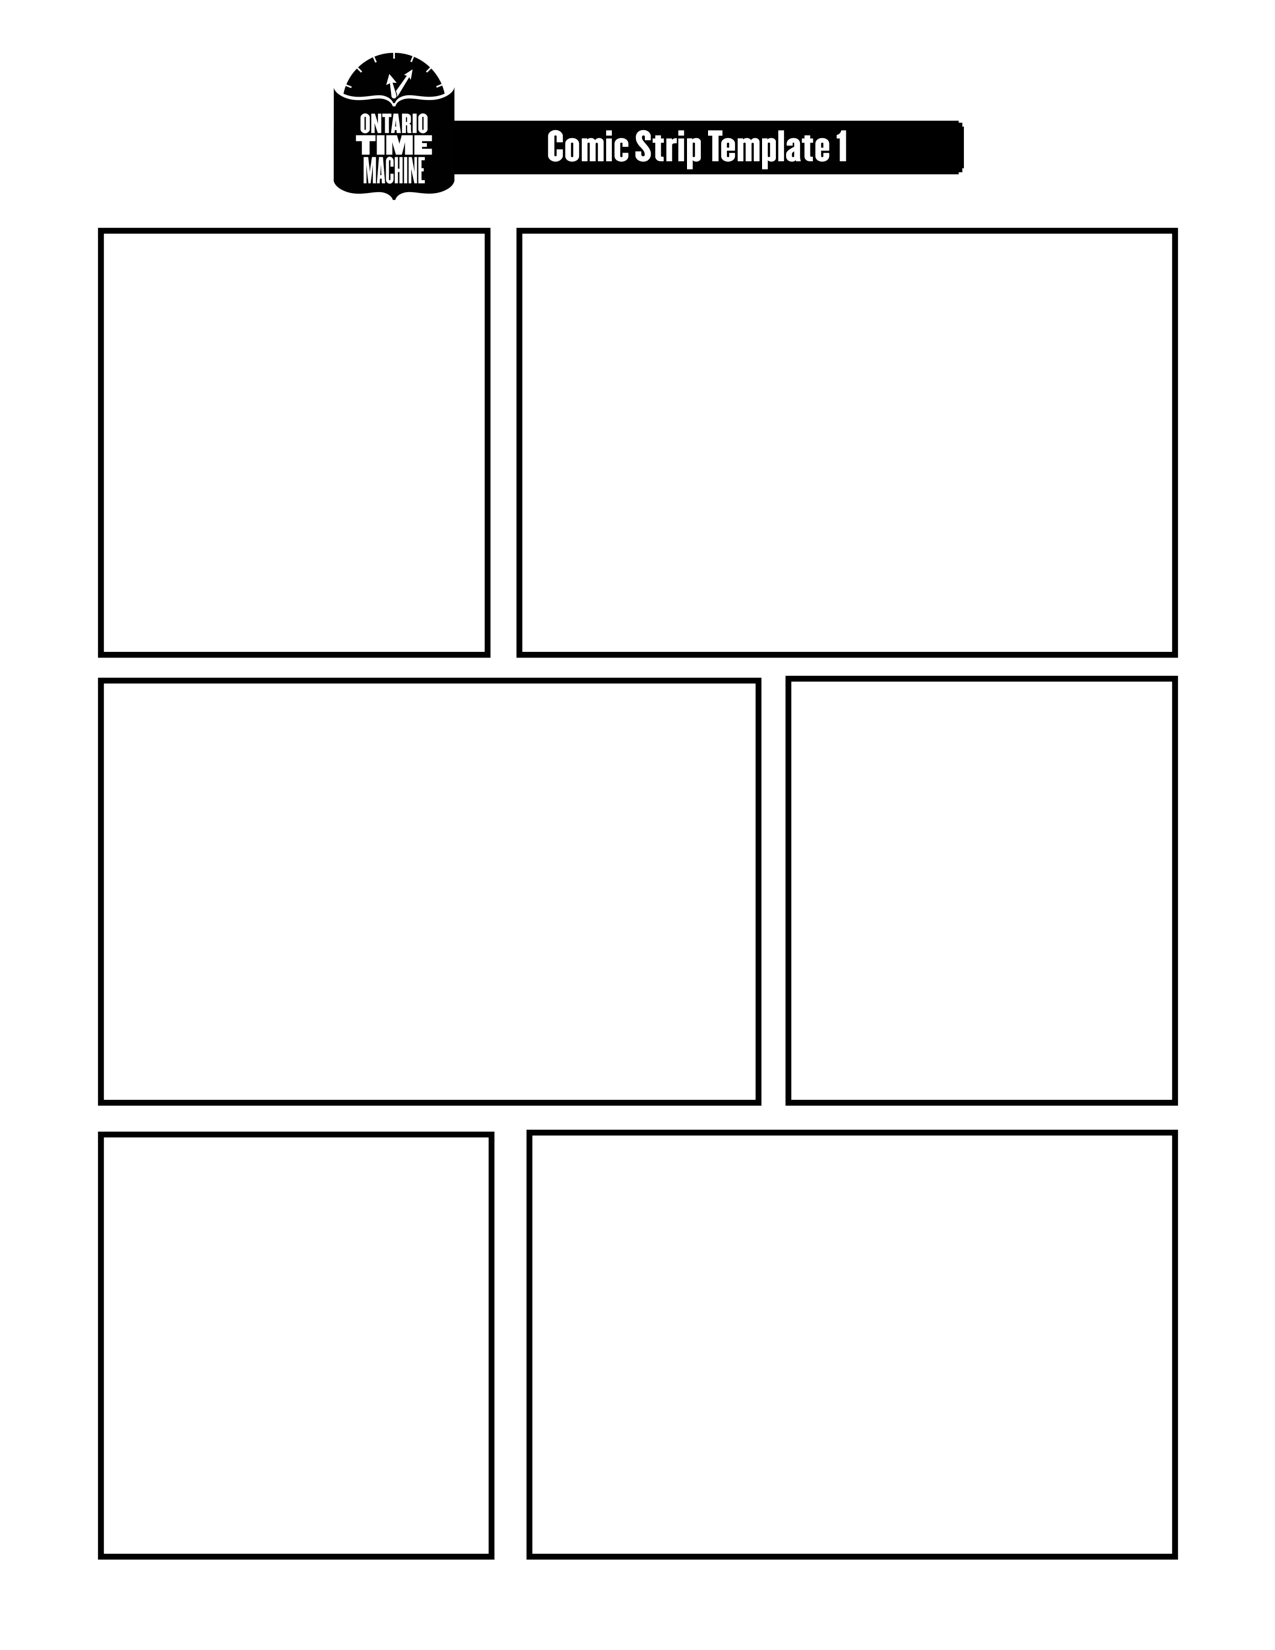 Cartooning Blanks Here Are A Few Ideas For You On Working On Within Printable Blank Comic Strip Template For Kids